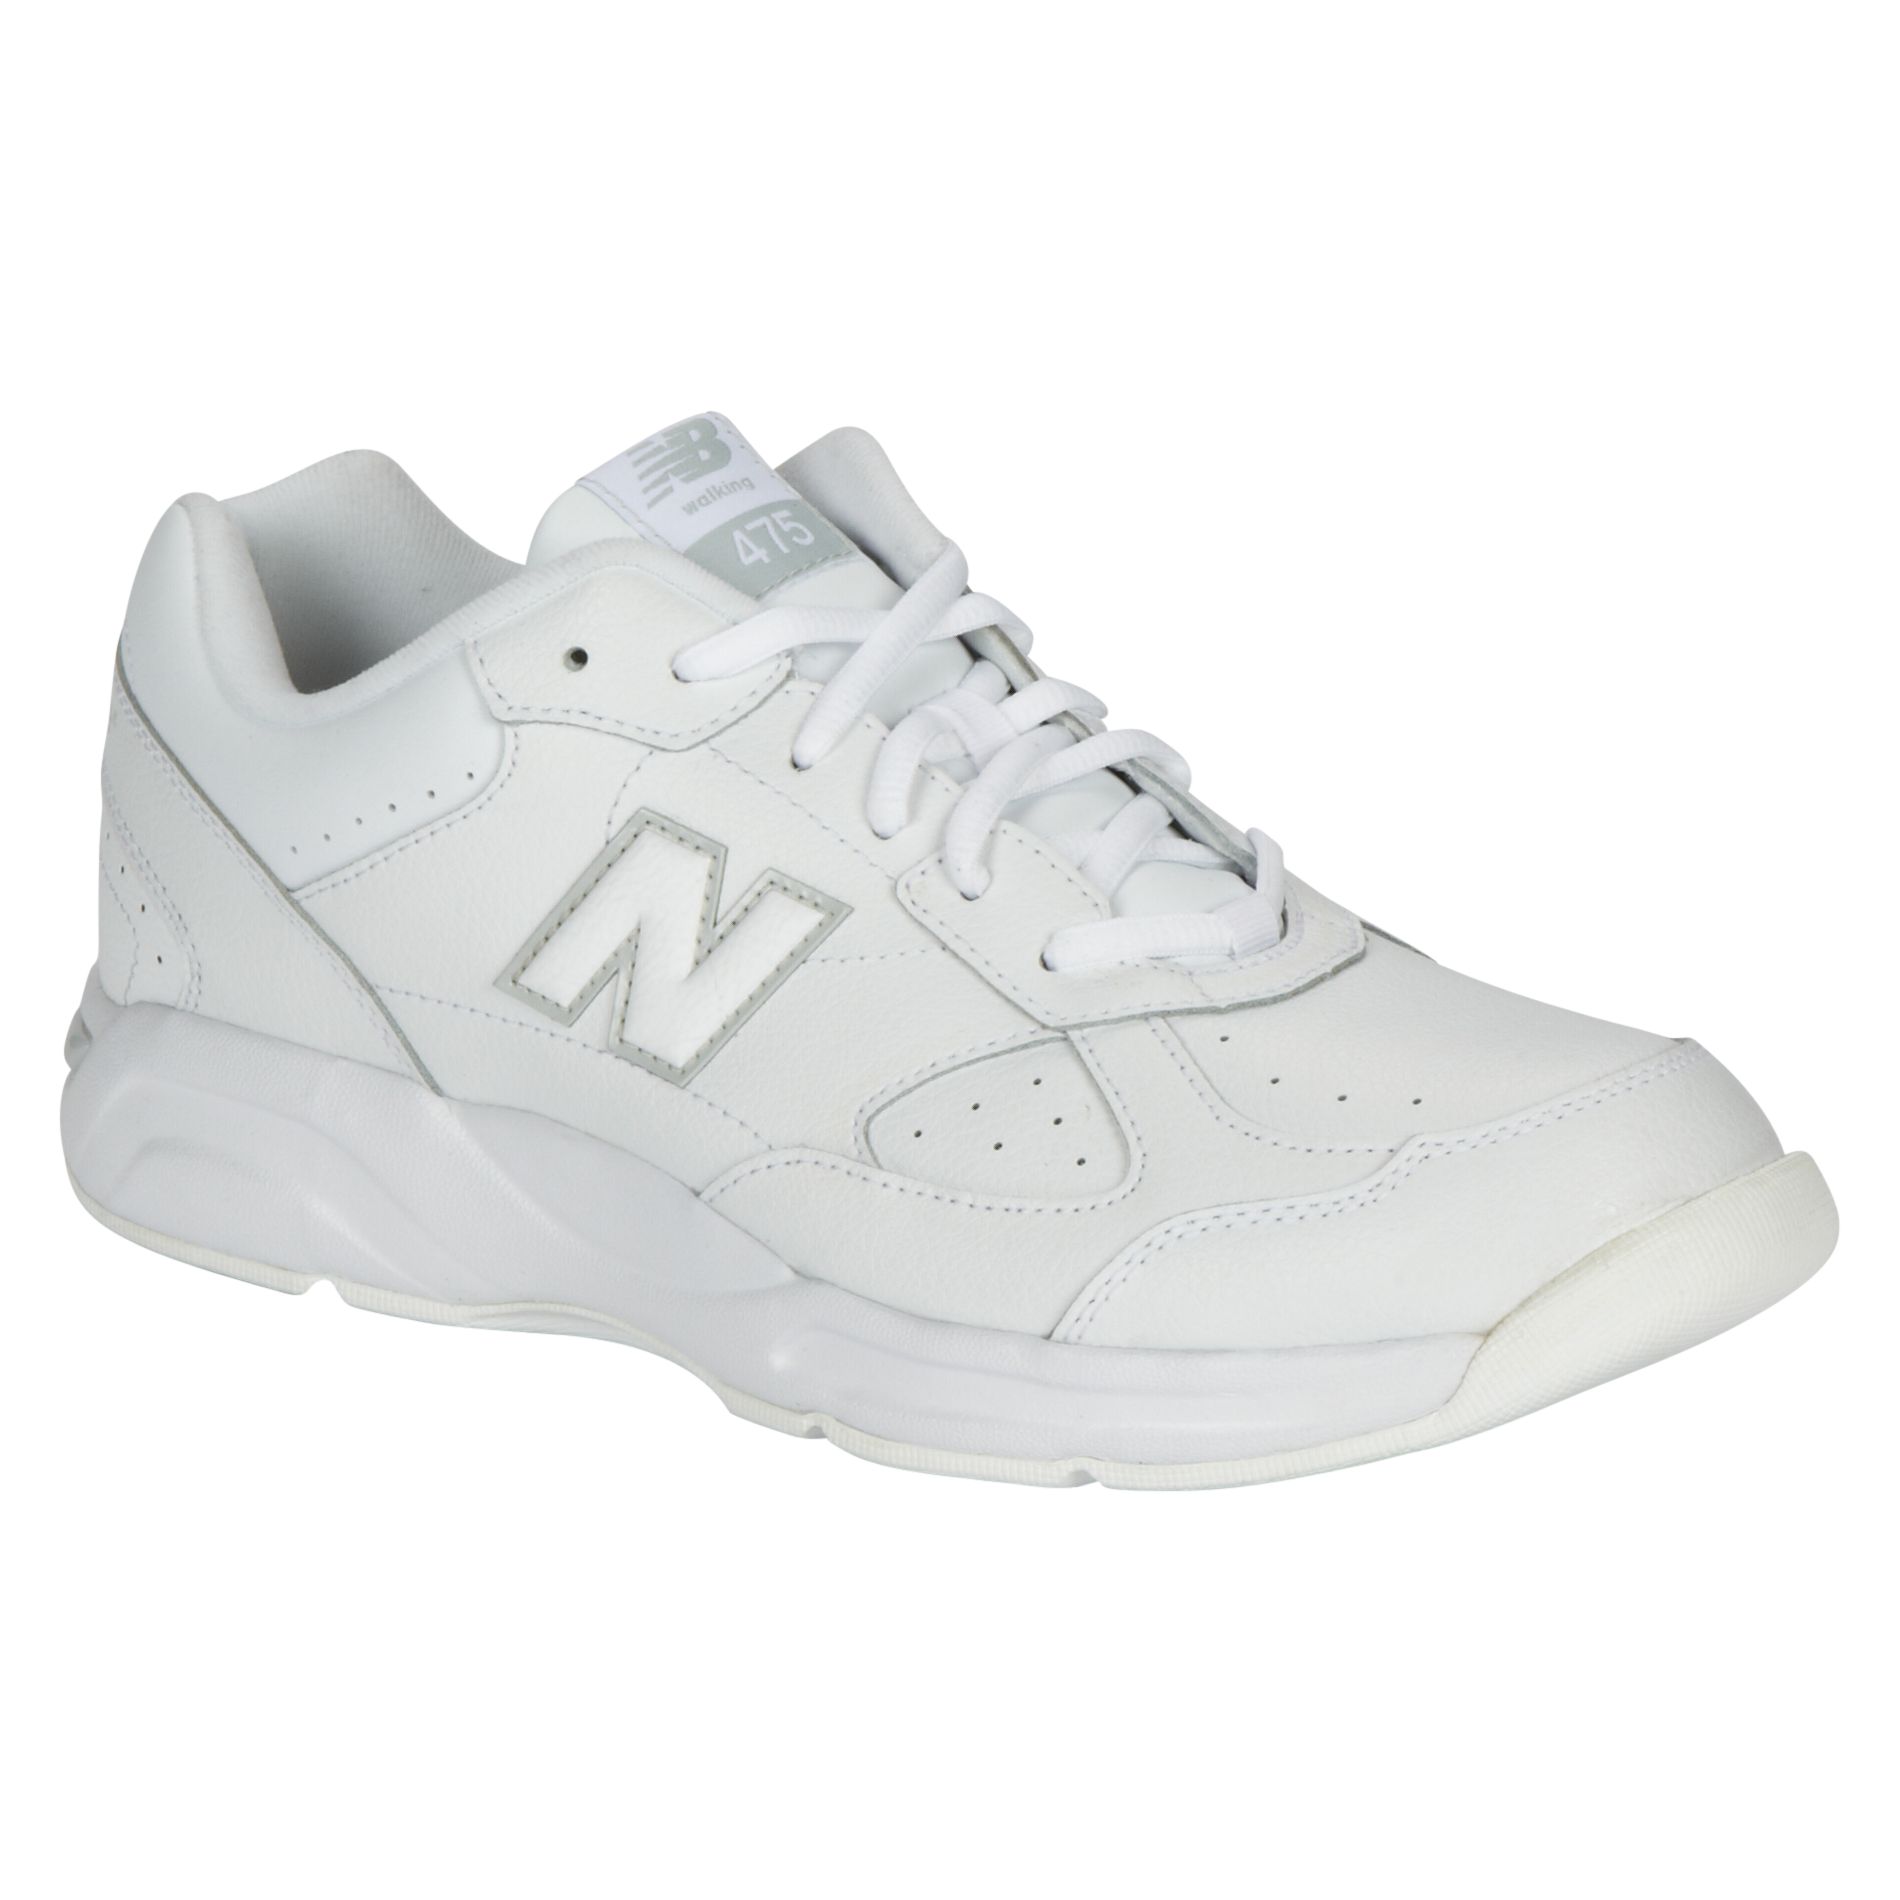 New Balance Men's 475 Walking Athletic Shoe - Wide Available - White ...